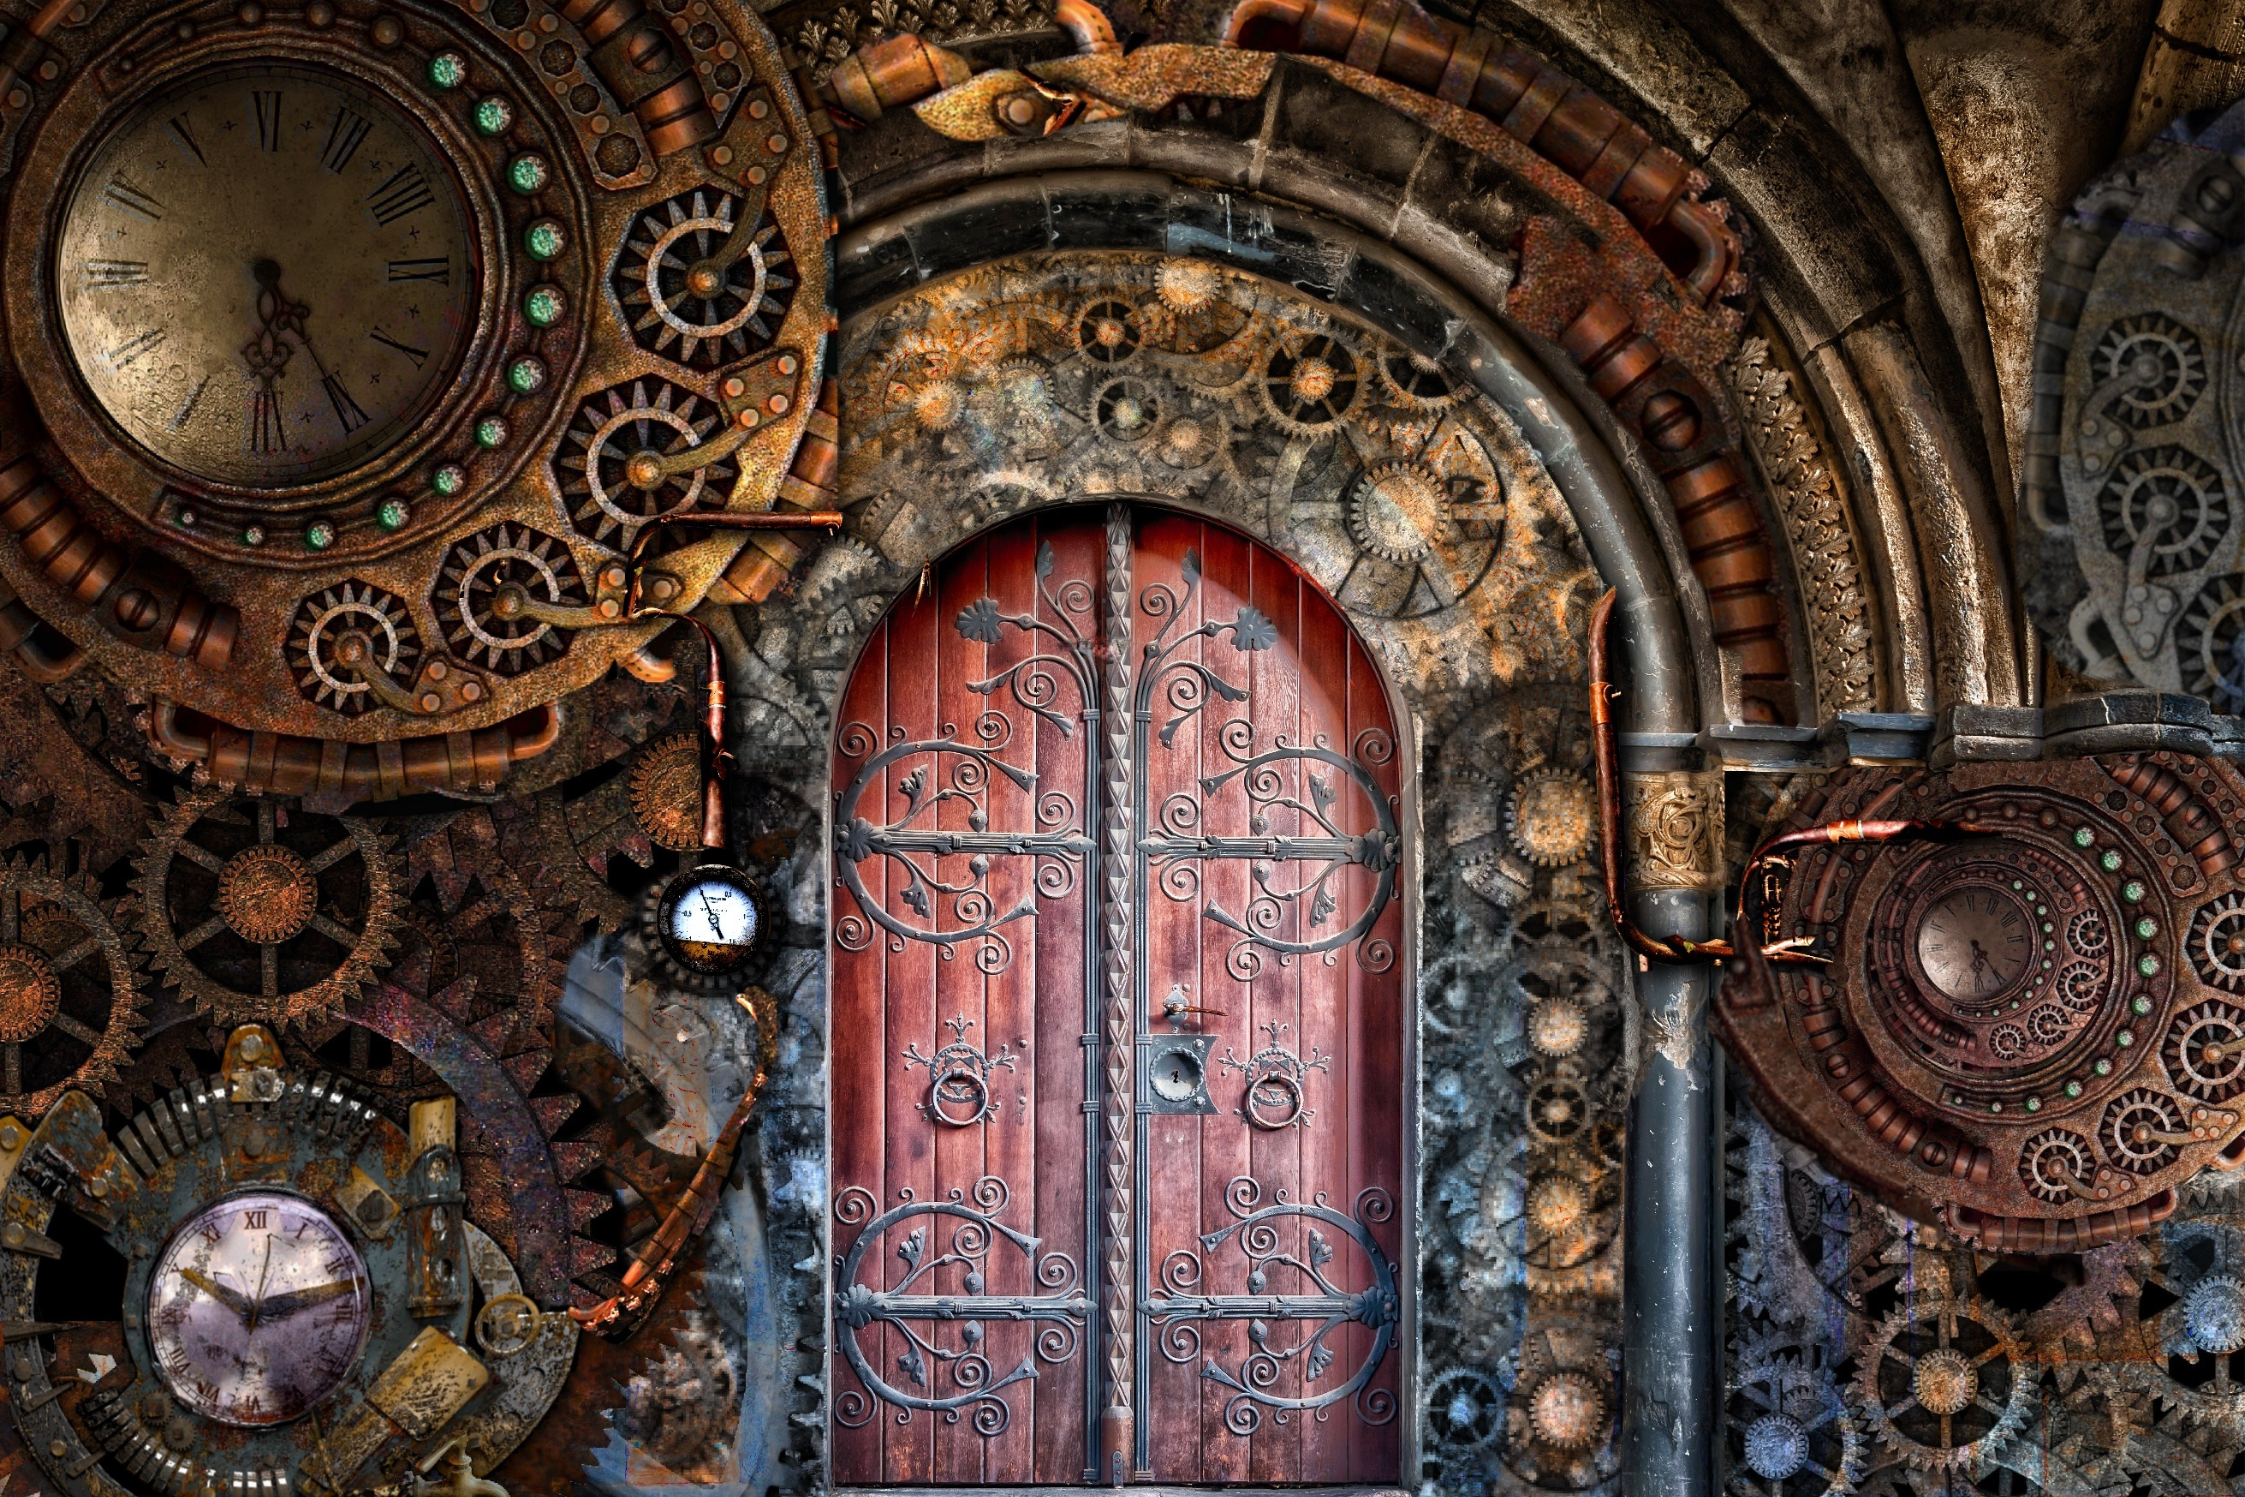 A fantastical steampunk scene. There is a brown door in the centre and lots of clockwork details with brass and rivets